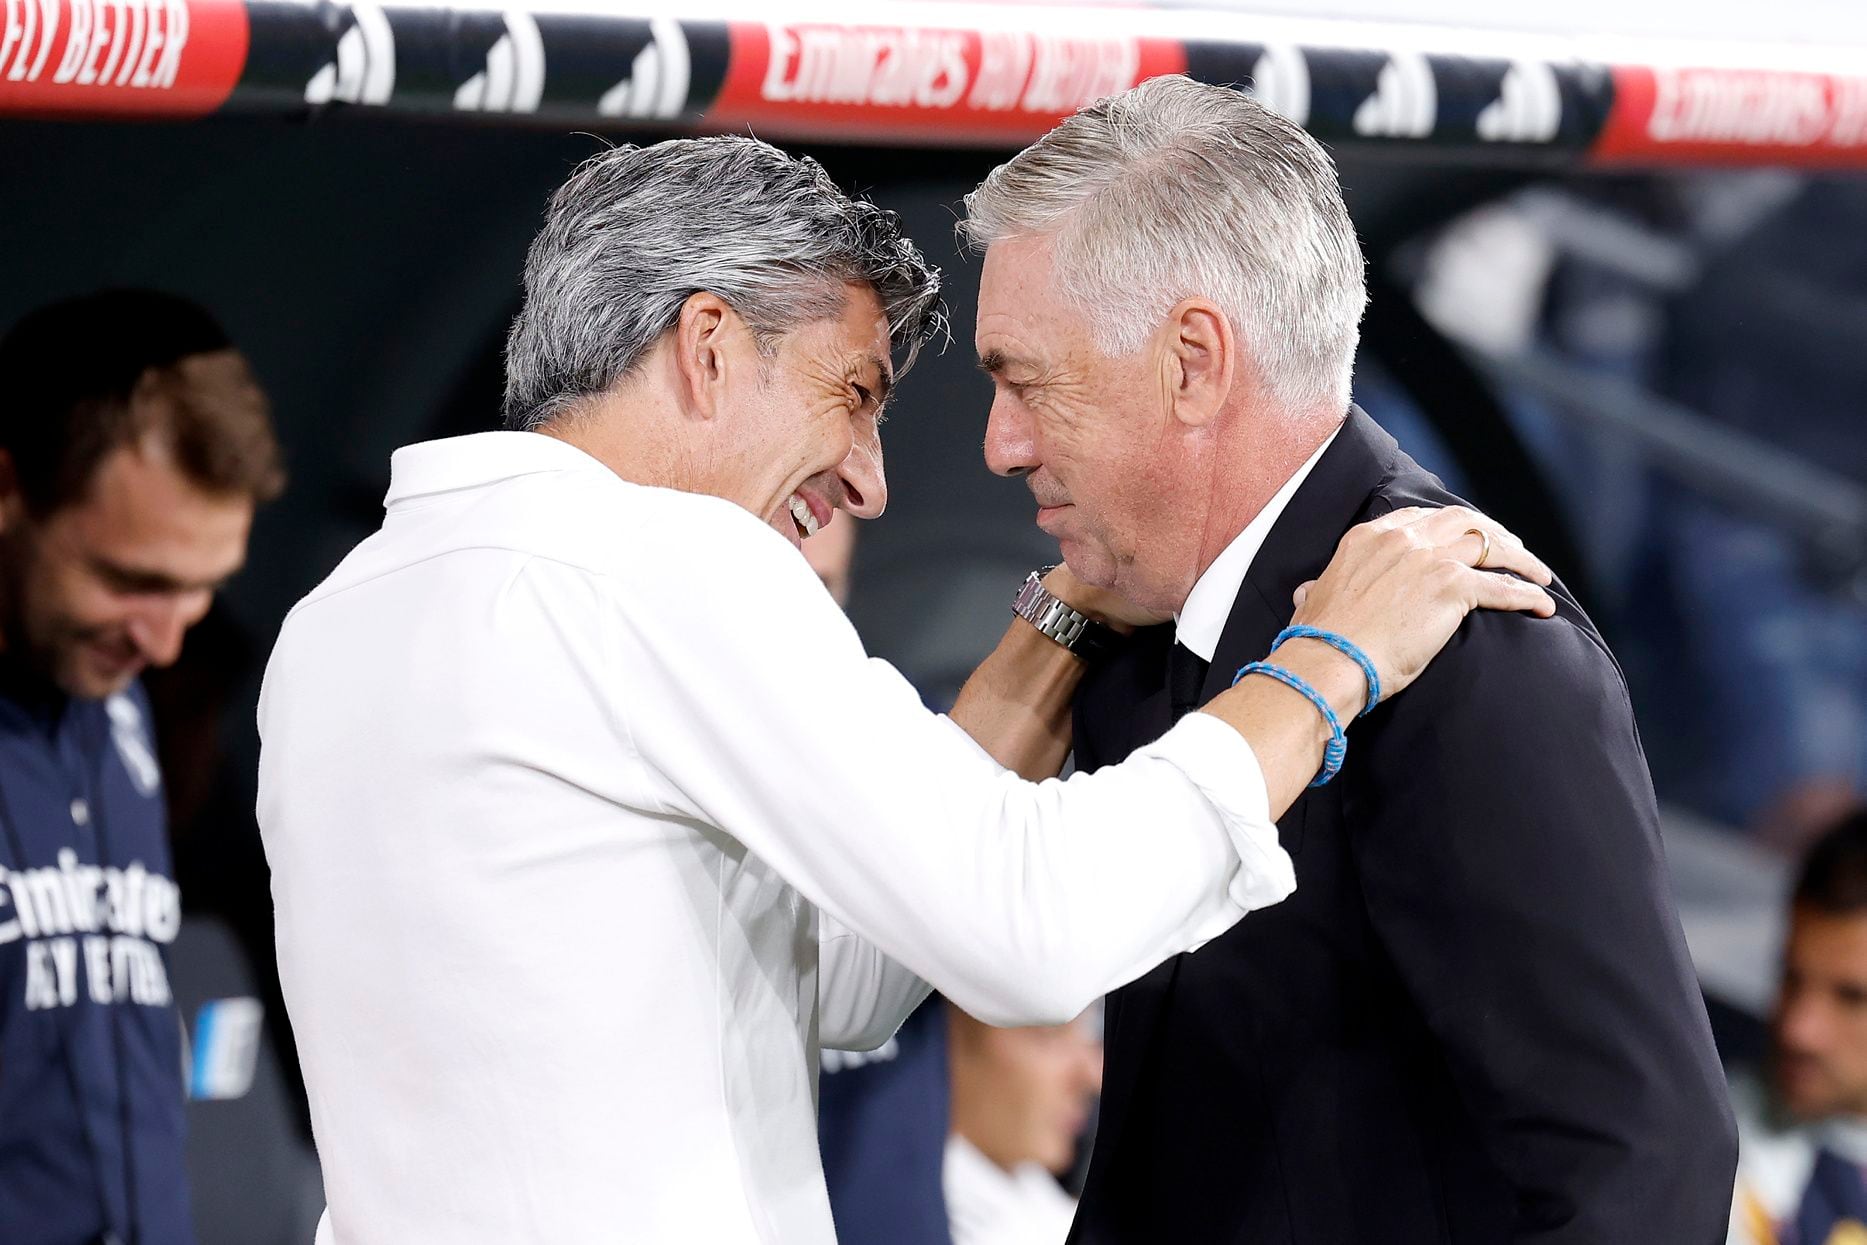 Carlo Ancelotti's post-match comments on their way